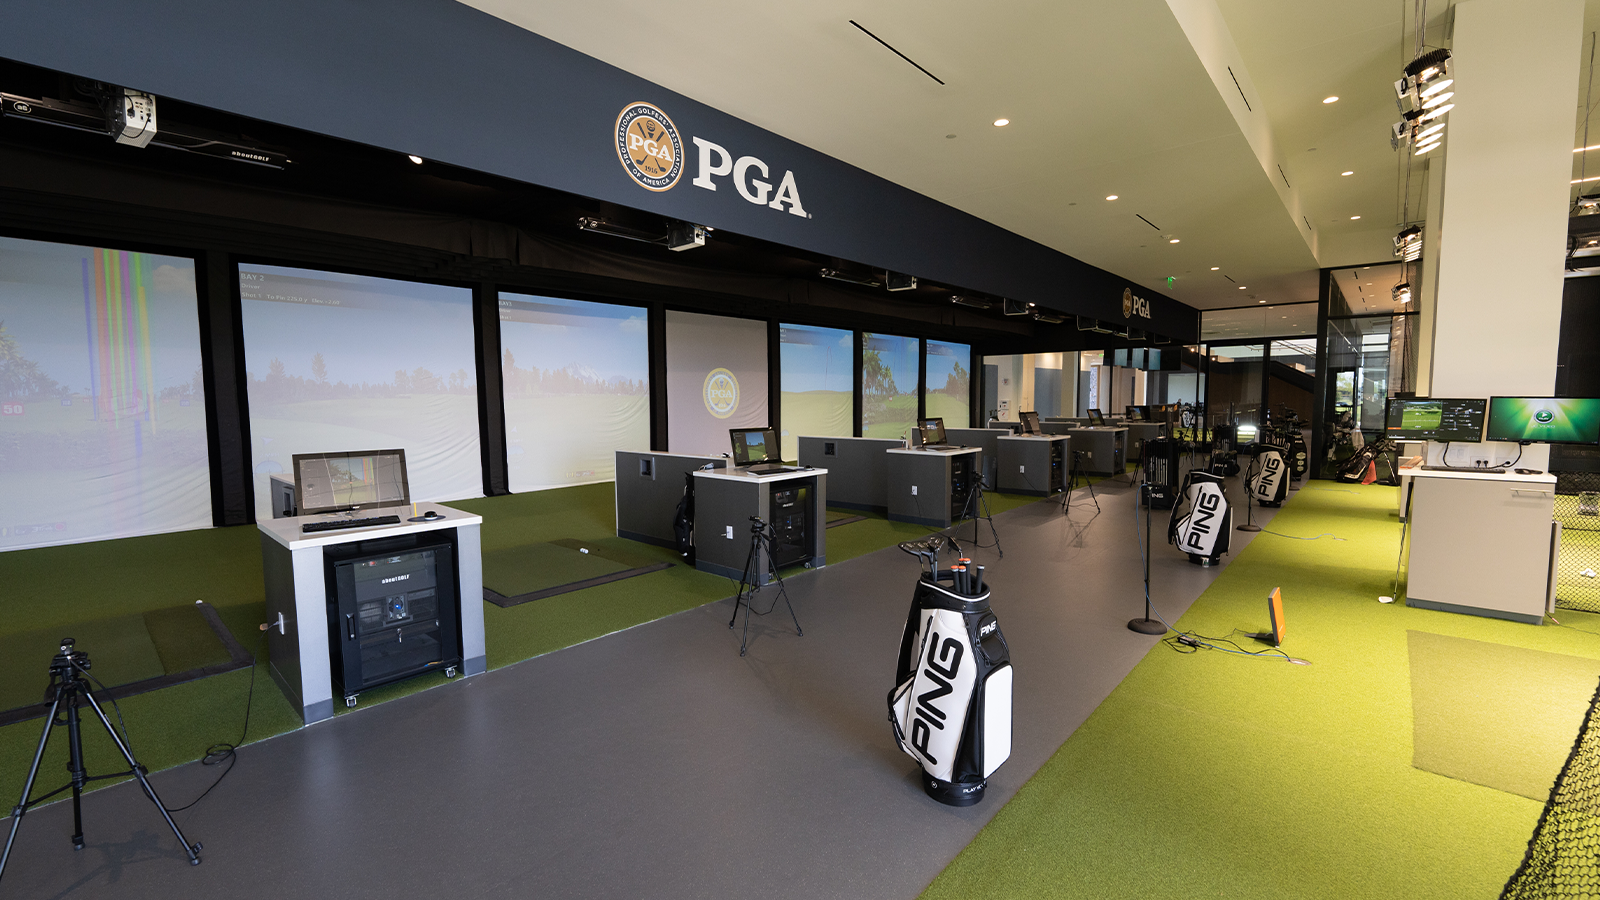 The Golf Simulators in the golf learning center at the PGA Frisco Campus on August 17, 2022 in Frisco, Texas. (Photo by The Marmones LLC/PGA of America)